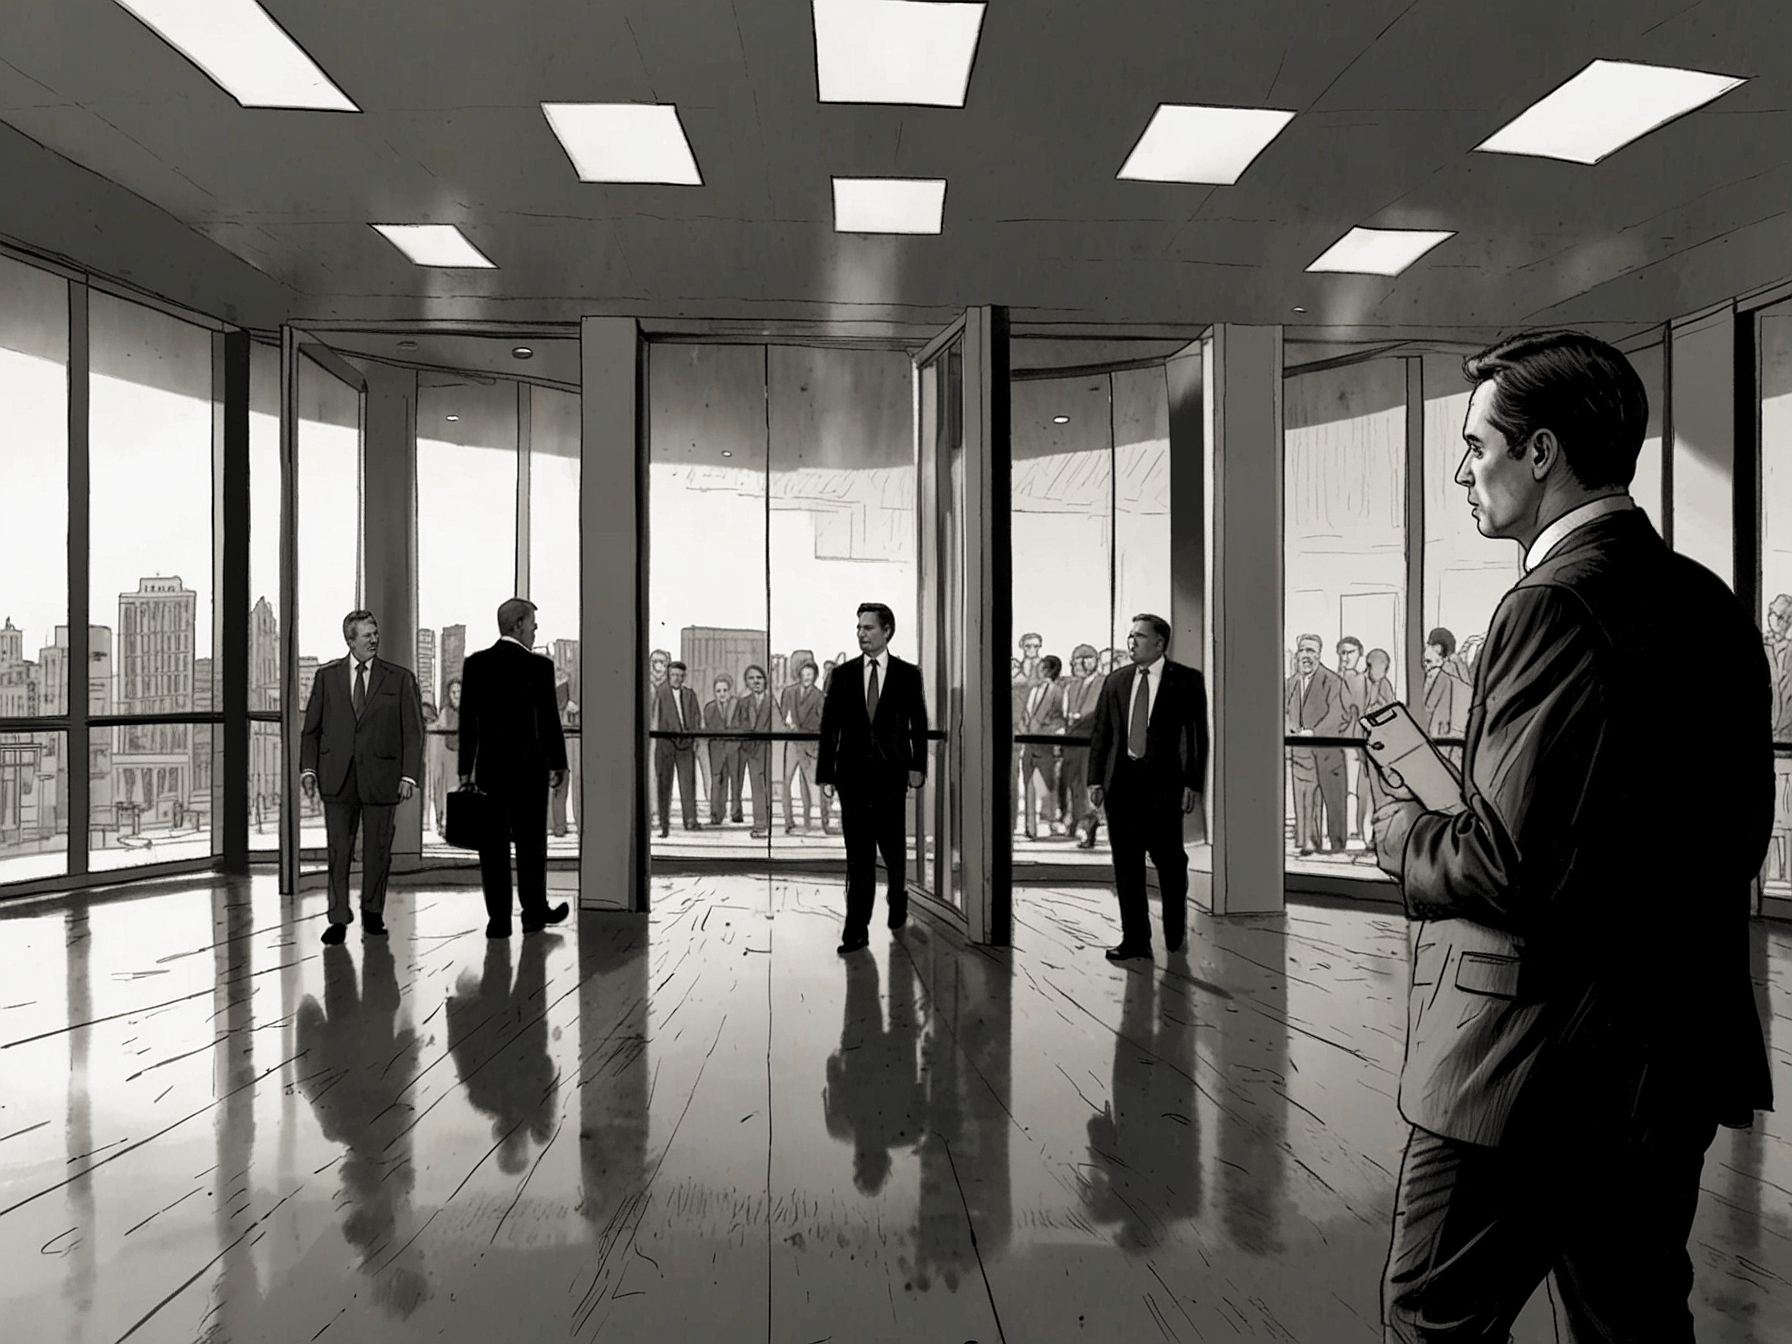 An illustration of a boardroom with a revolving door and multiple CEOs entering and leaving, depicting the frequent changes and lack of consistent leadership at XYZ Corp.